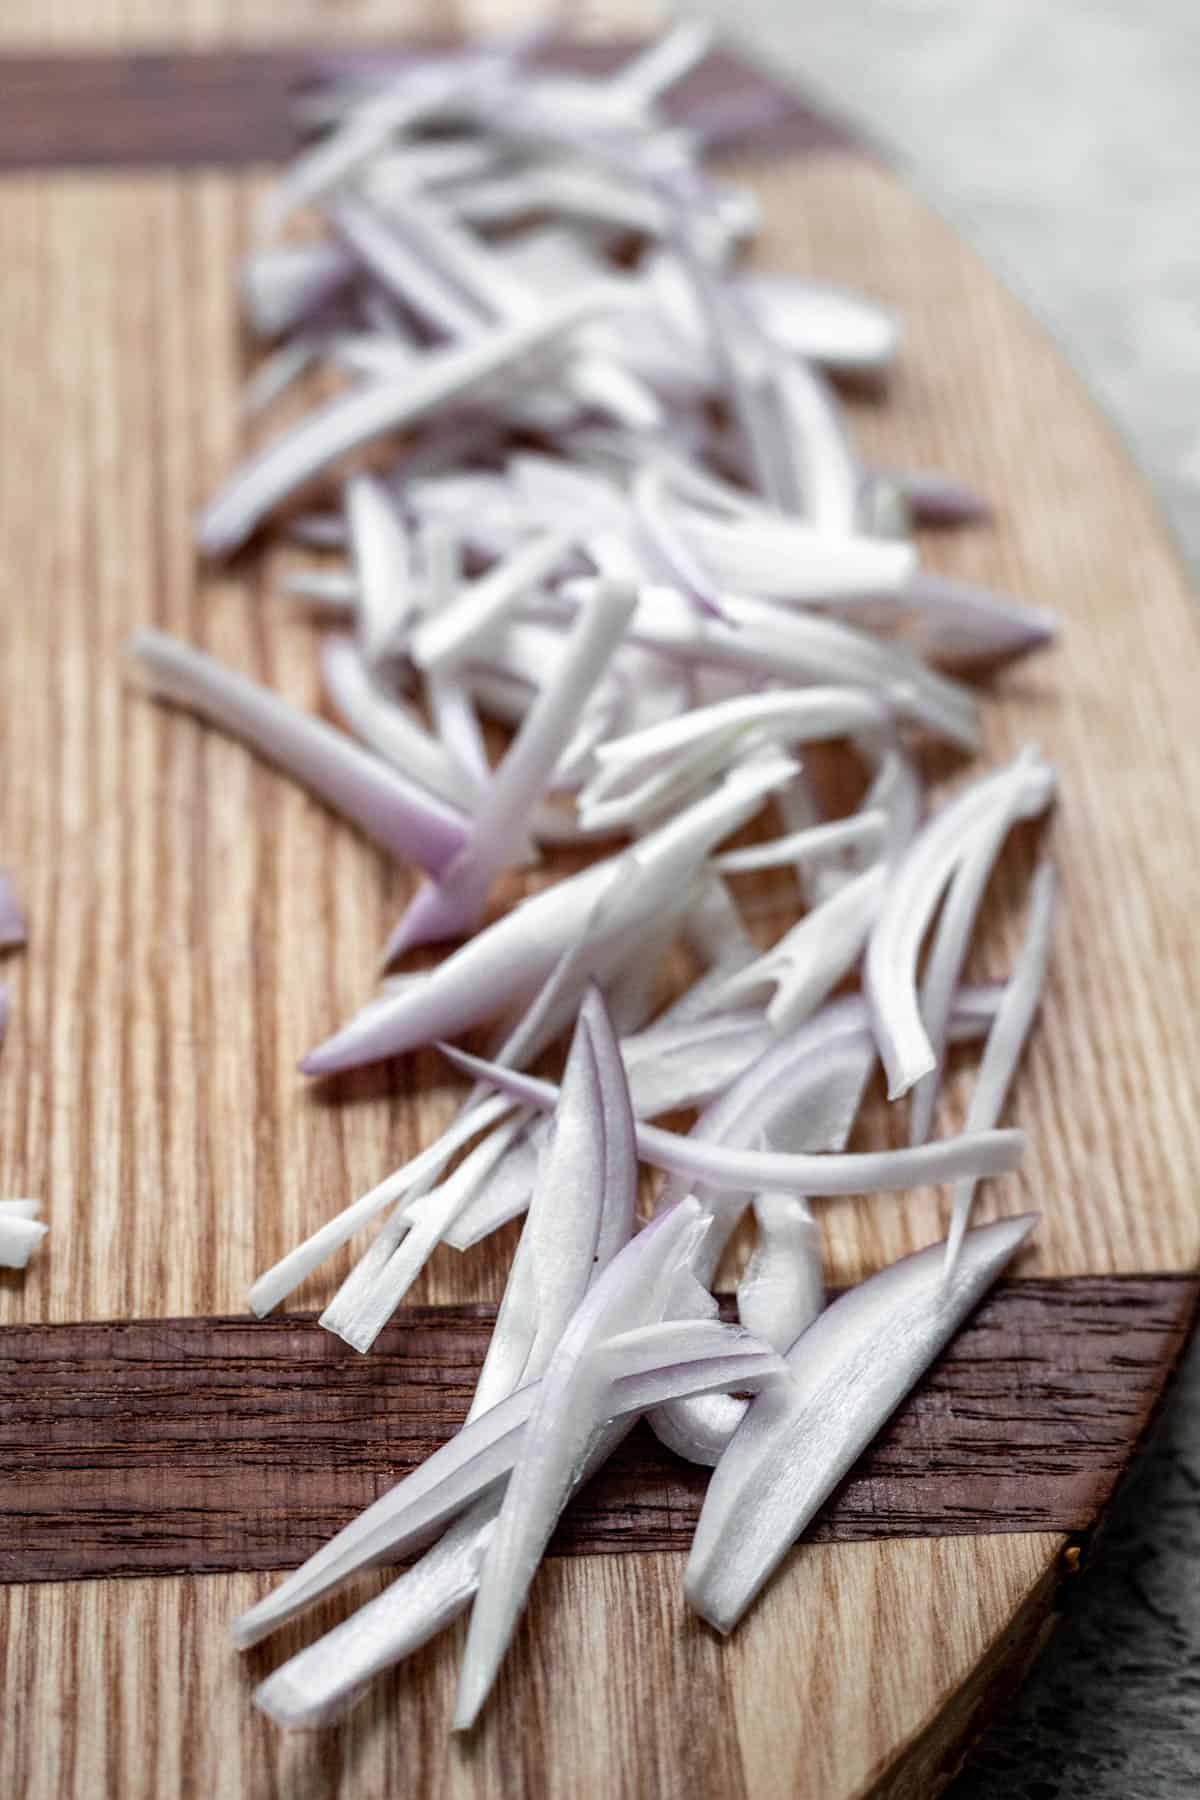 Julienned slices of shallot on a cutting board.